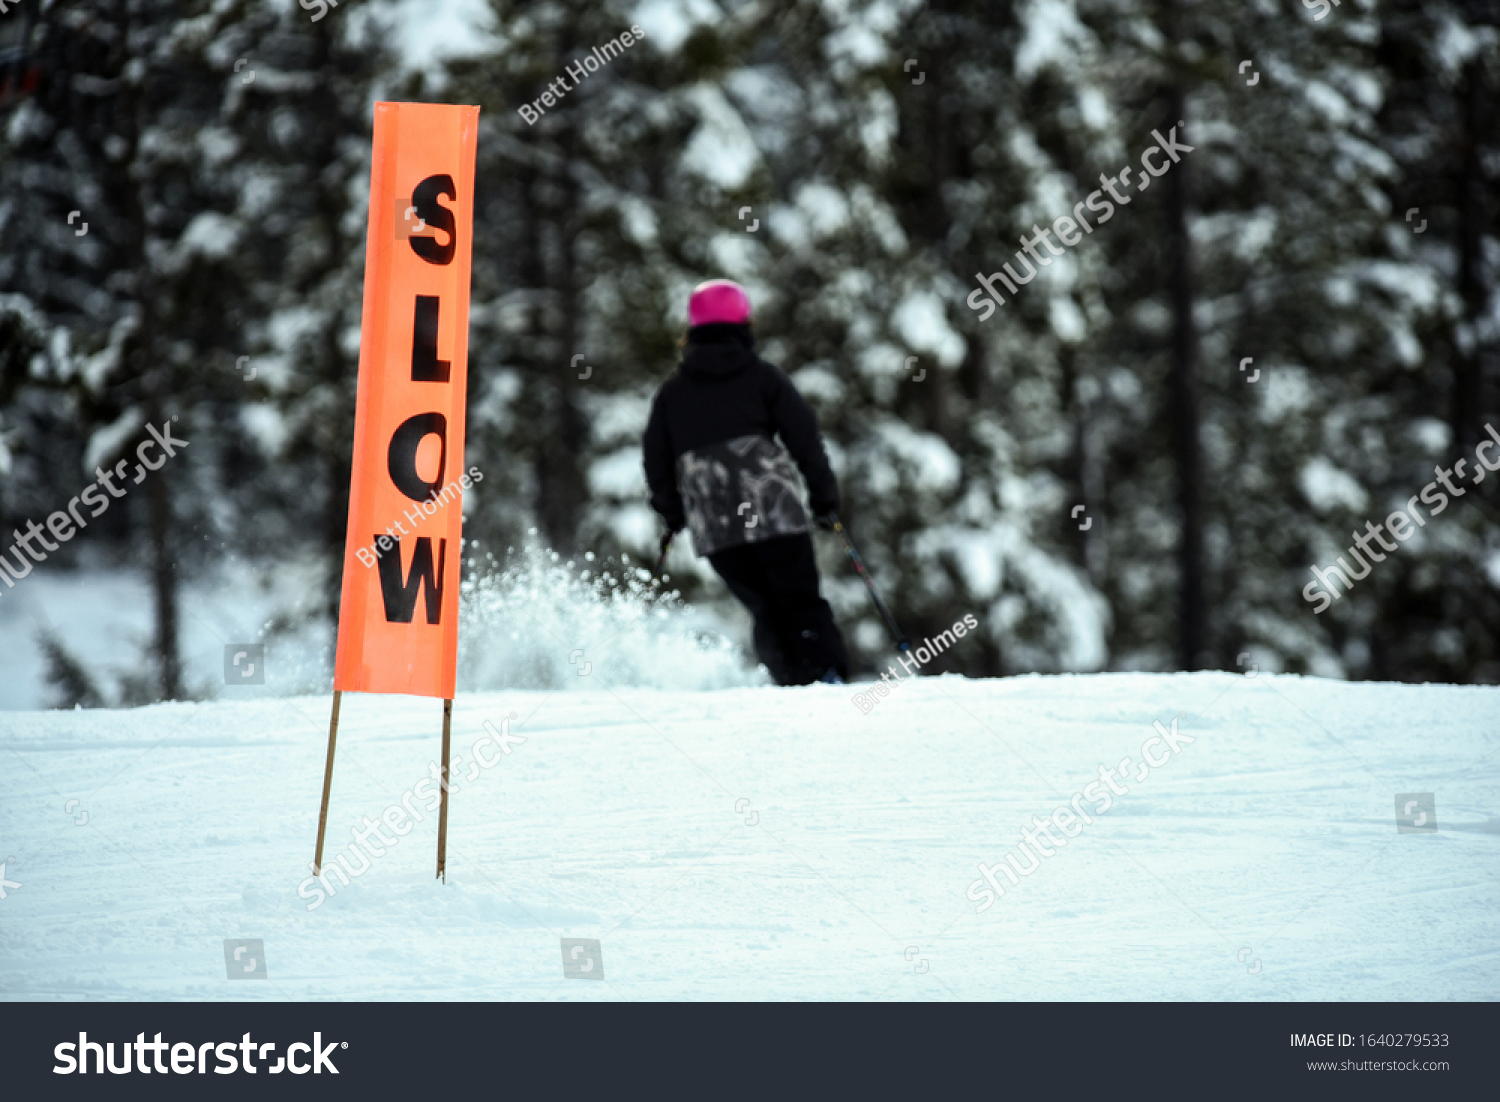 Orange slow caution sign with skier on downhill run #1640279533